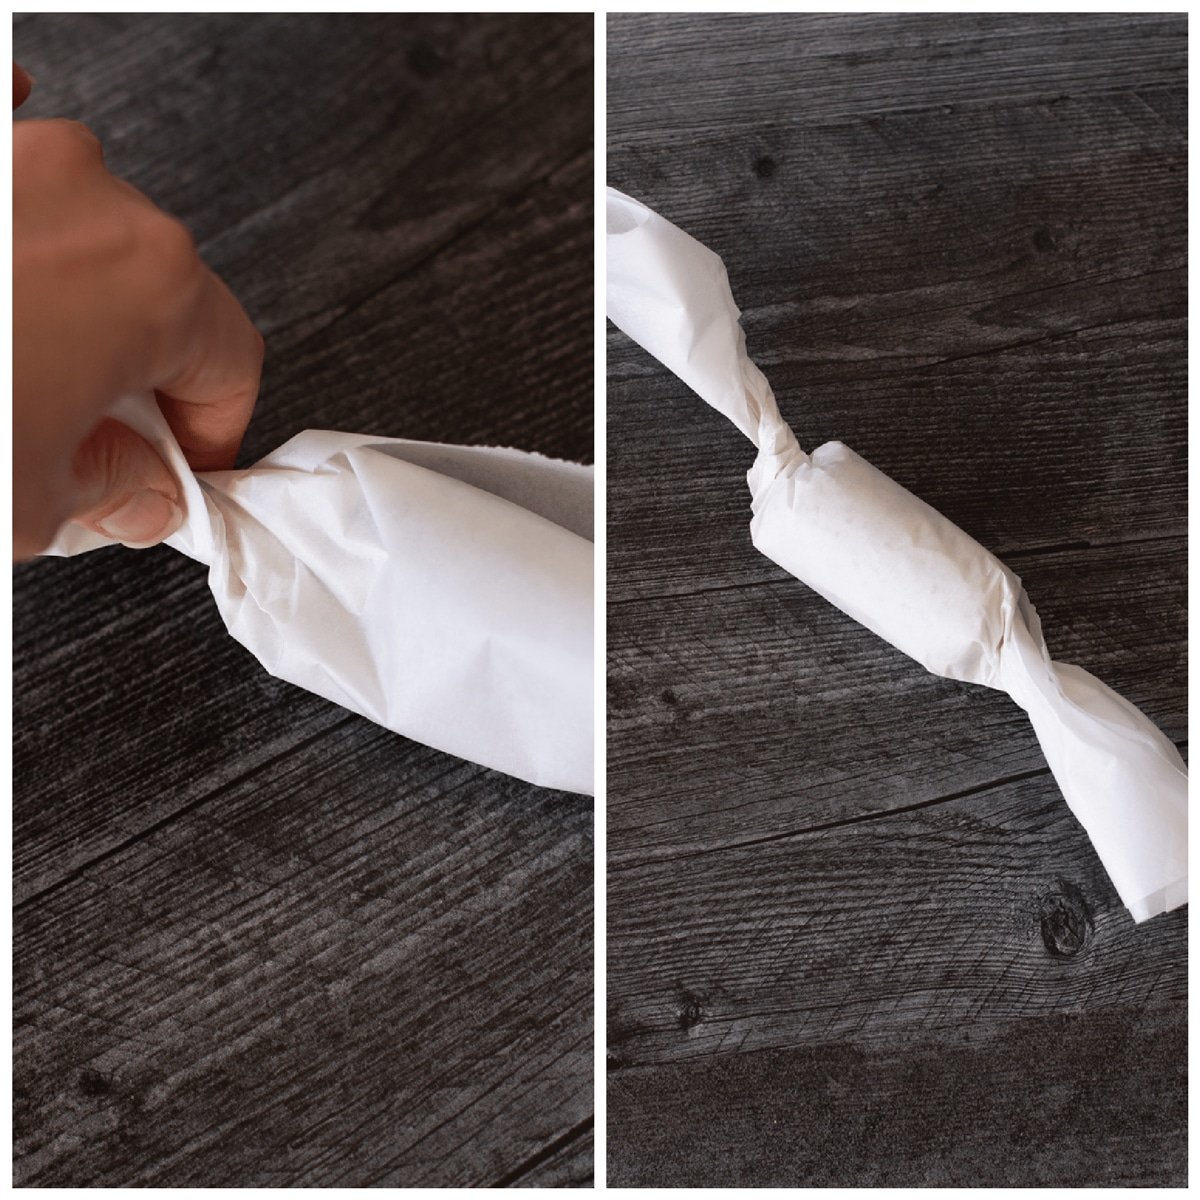 Person rolling compound butter in parchment paper.